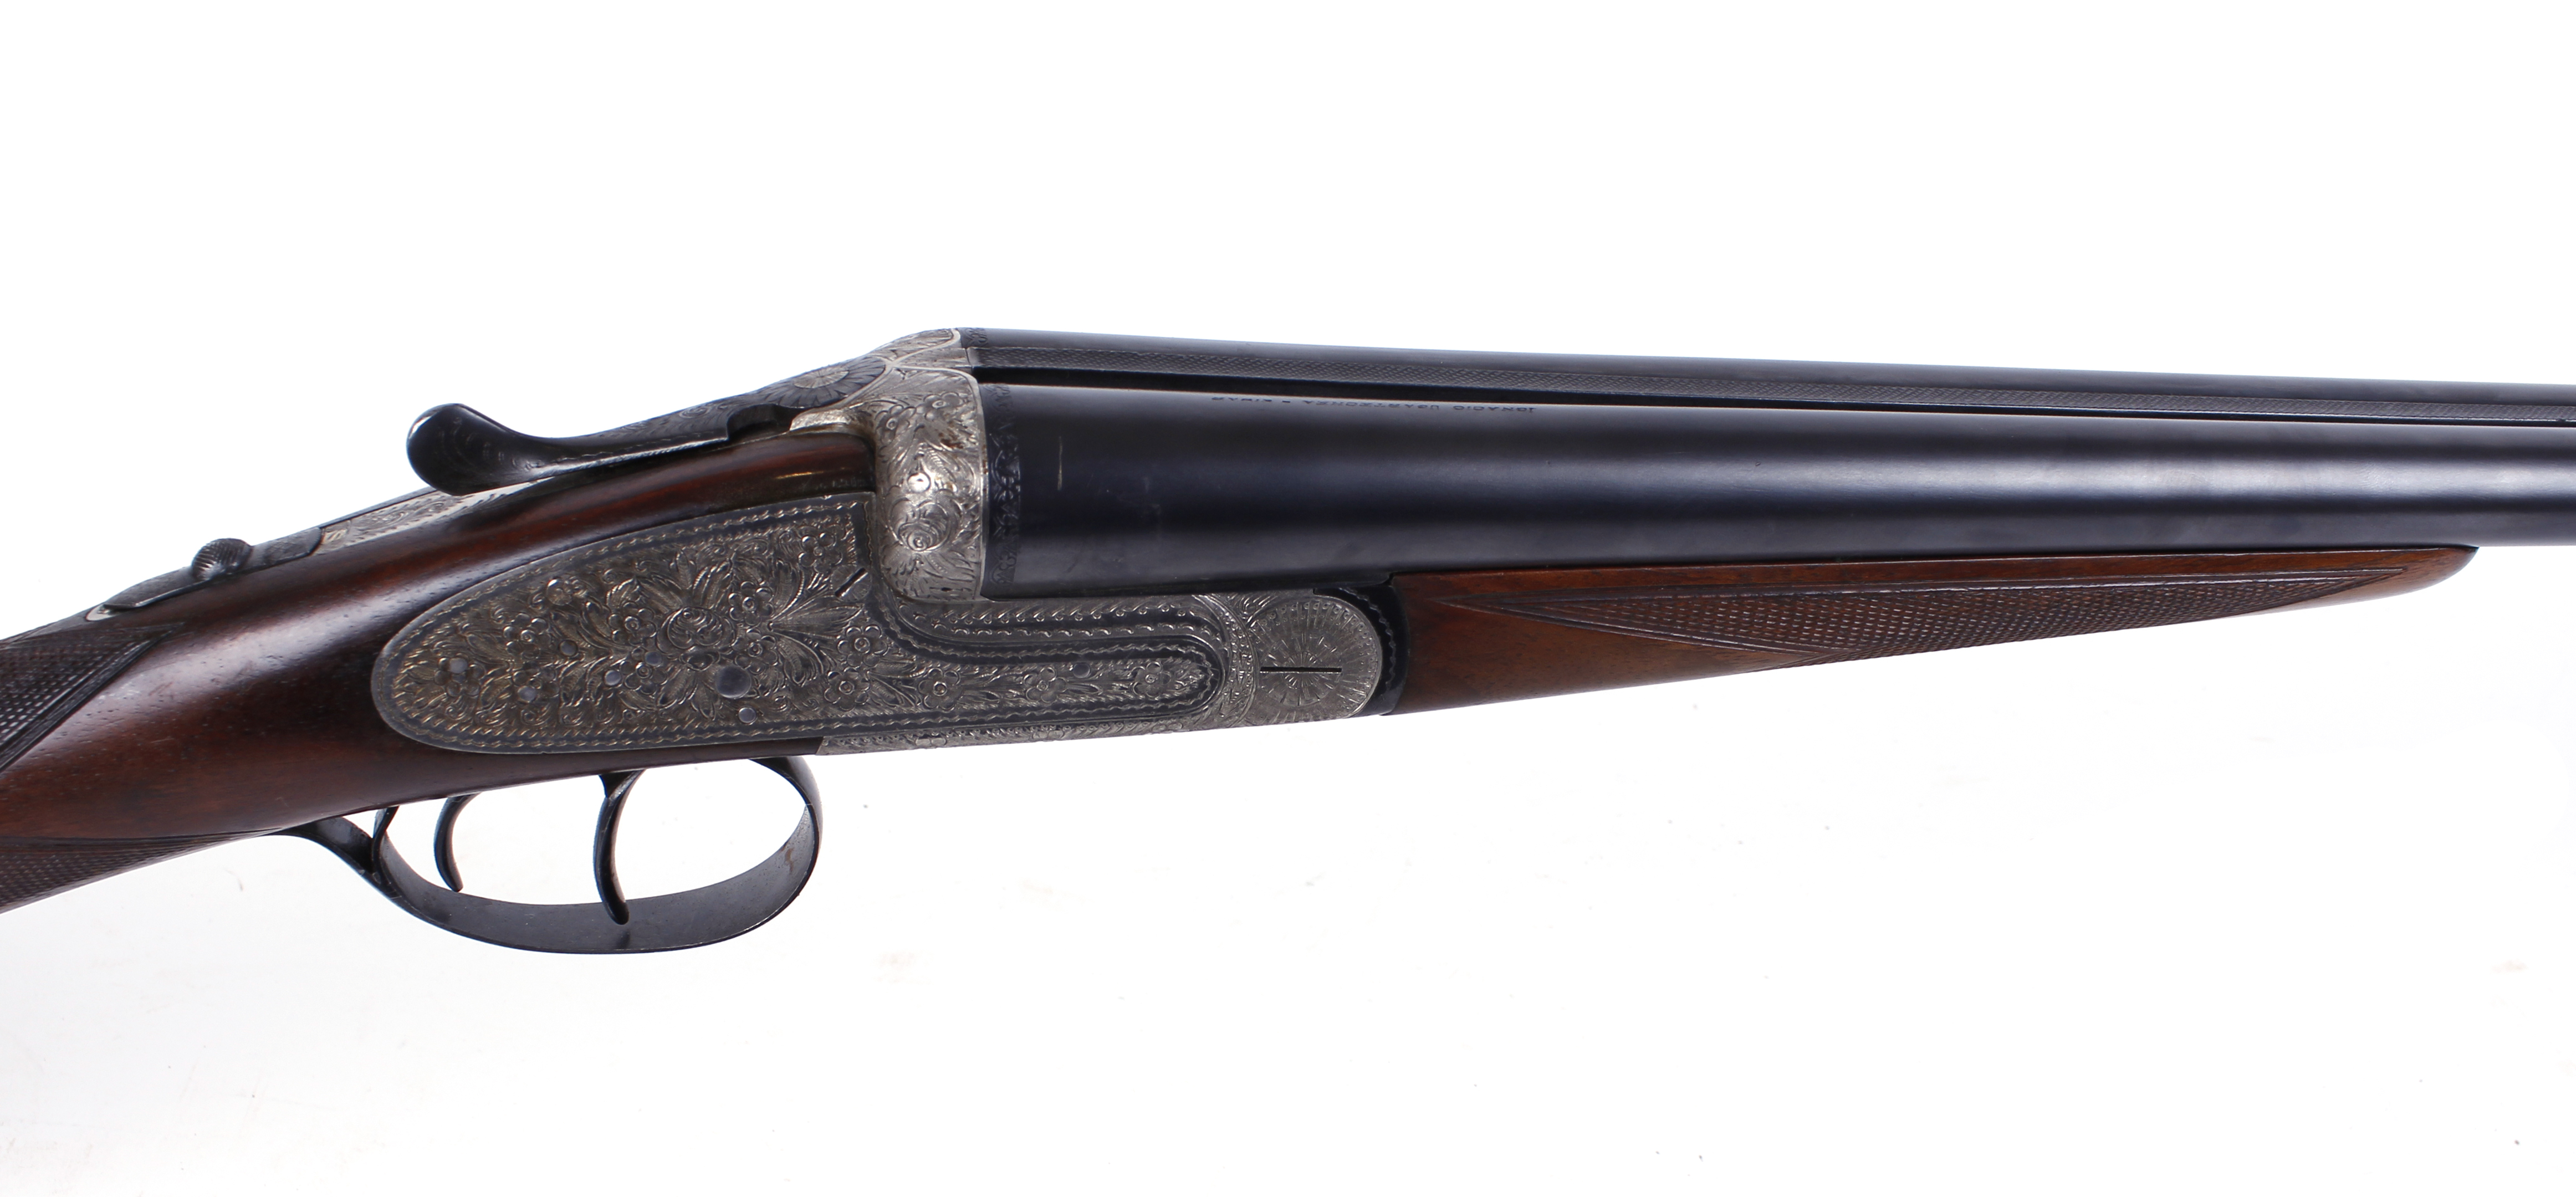 12 bore sidelock ejector by Ugartechea, 27,1/2 ins barrels, ic&ic, 70mm chambers, border and foliate - Image 2 of 2